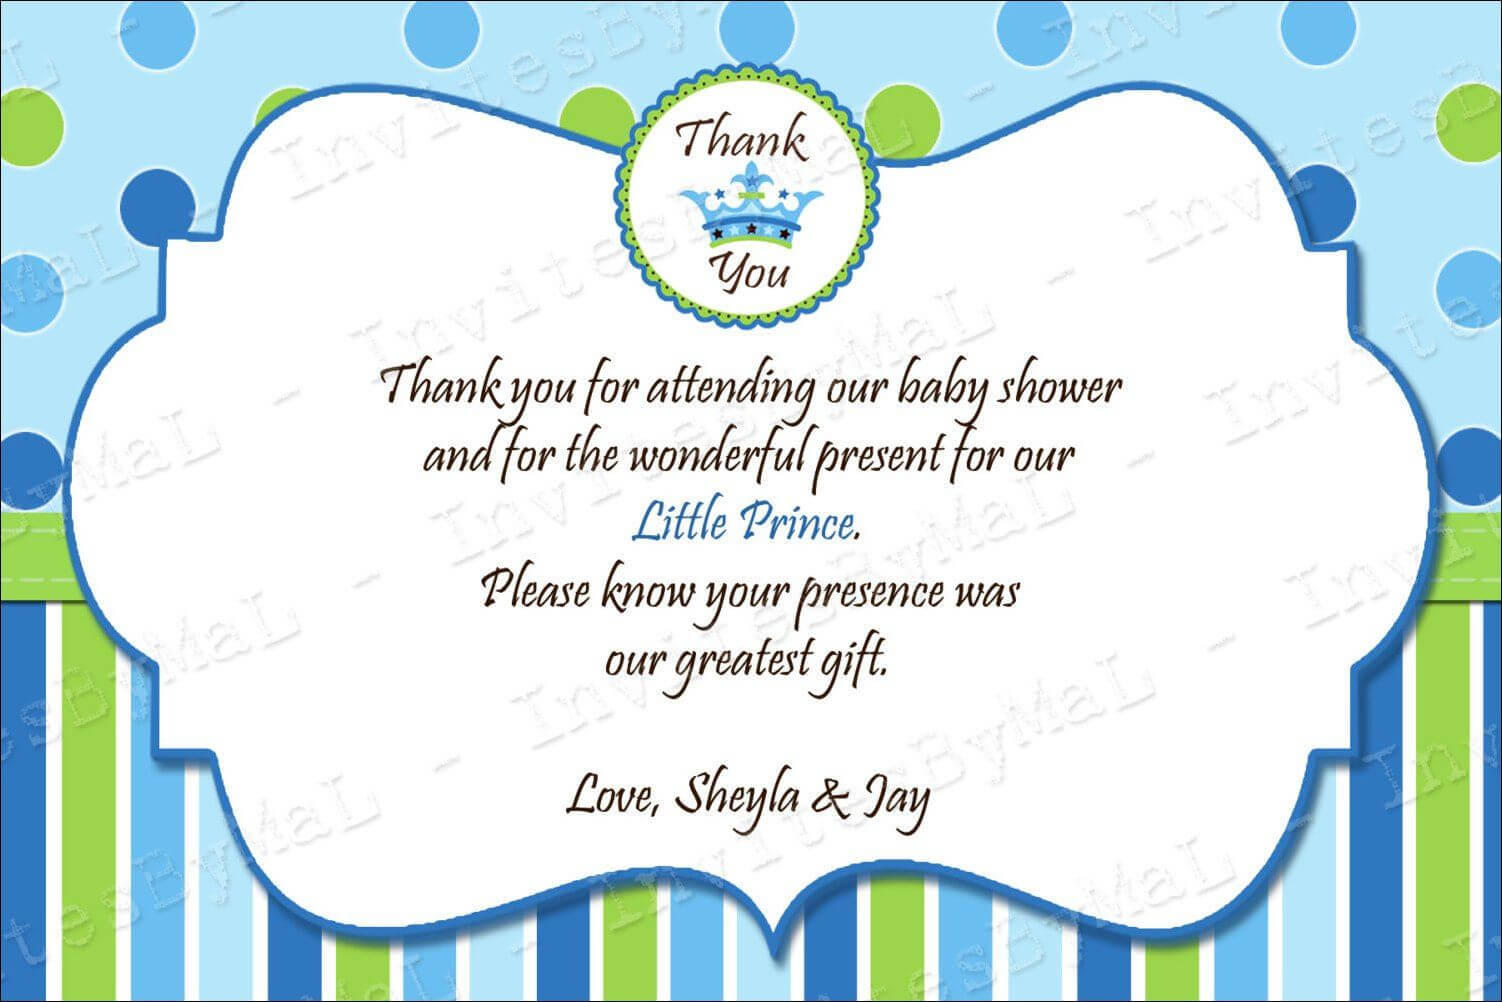 40 Beautiful Baby Shower Thank You Cards Ideas | Baby | Baby Throughout Template For Baby Shower Thank You Cards